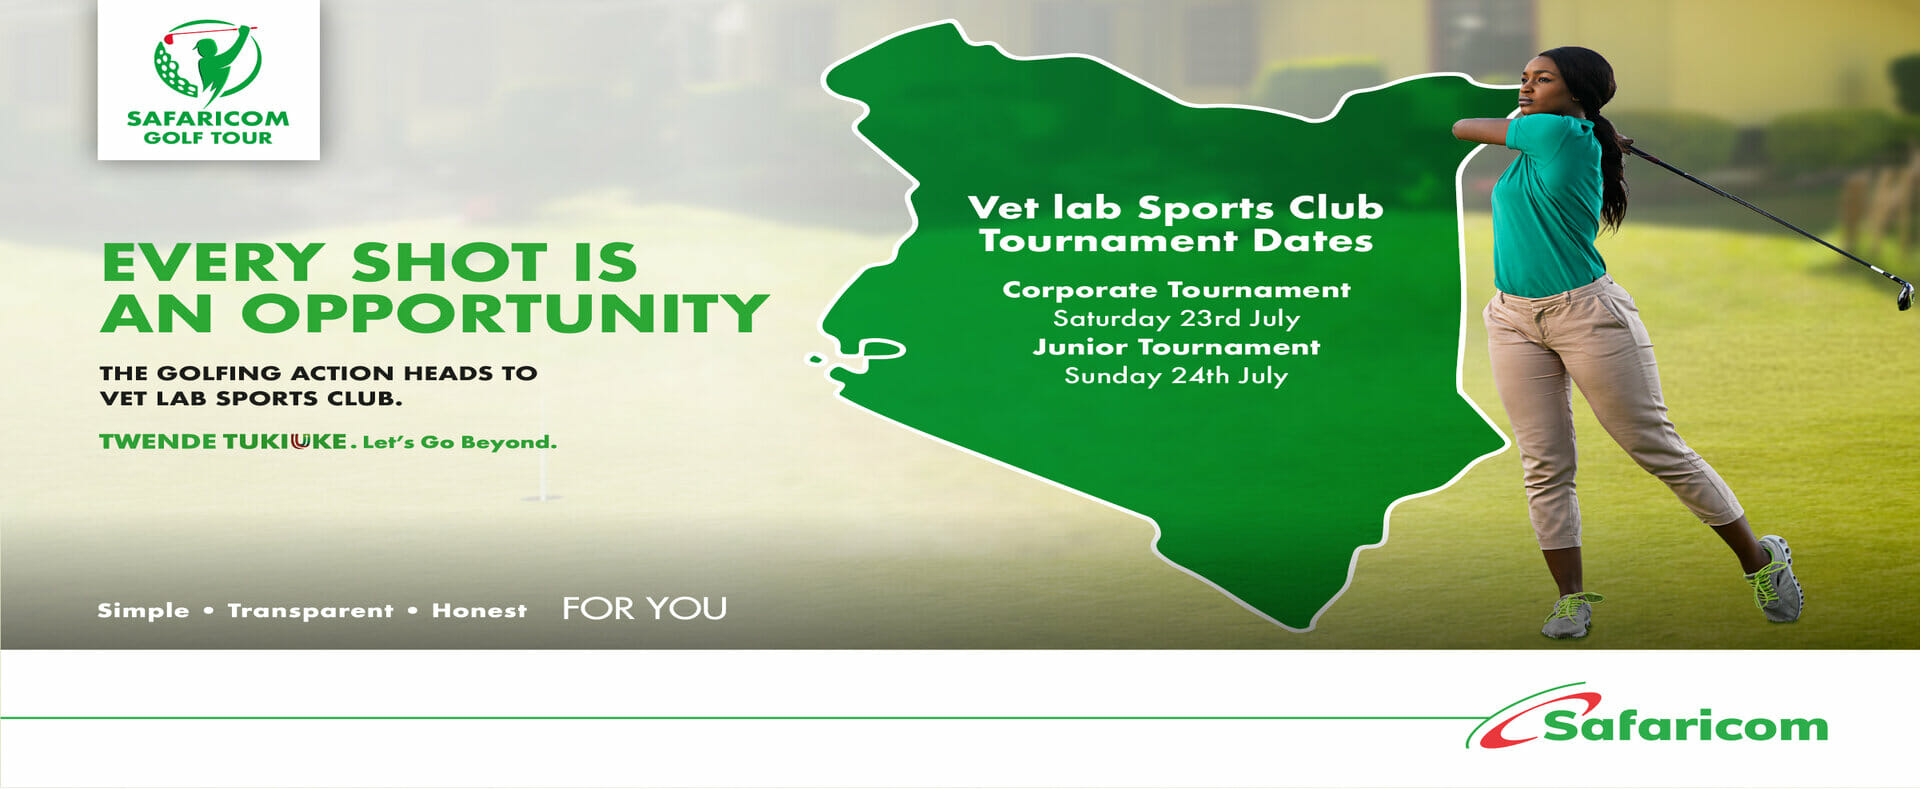 Safaricom Golf Tour Heads to Vet Lab for Penultimate Preliminary Round